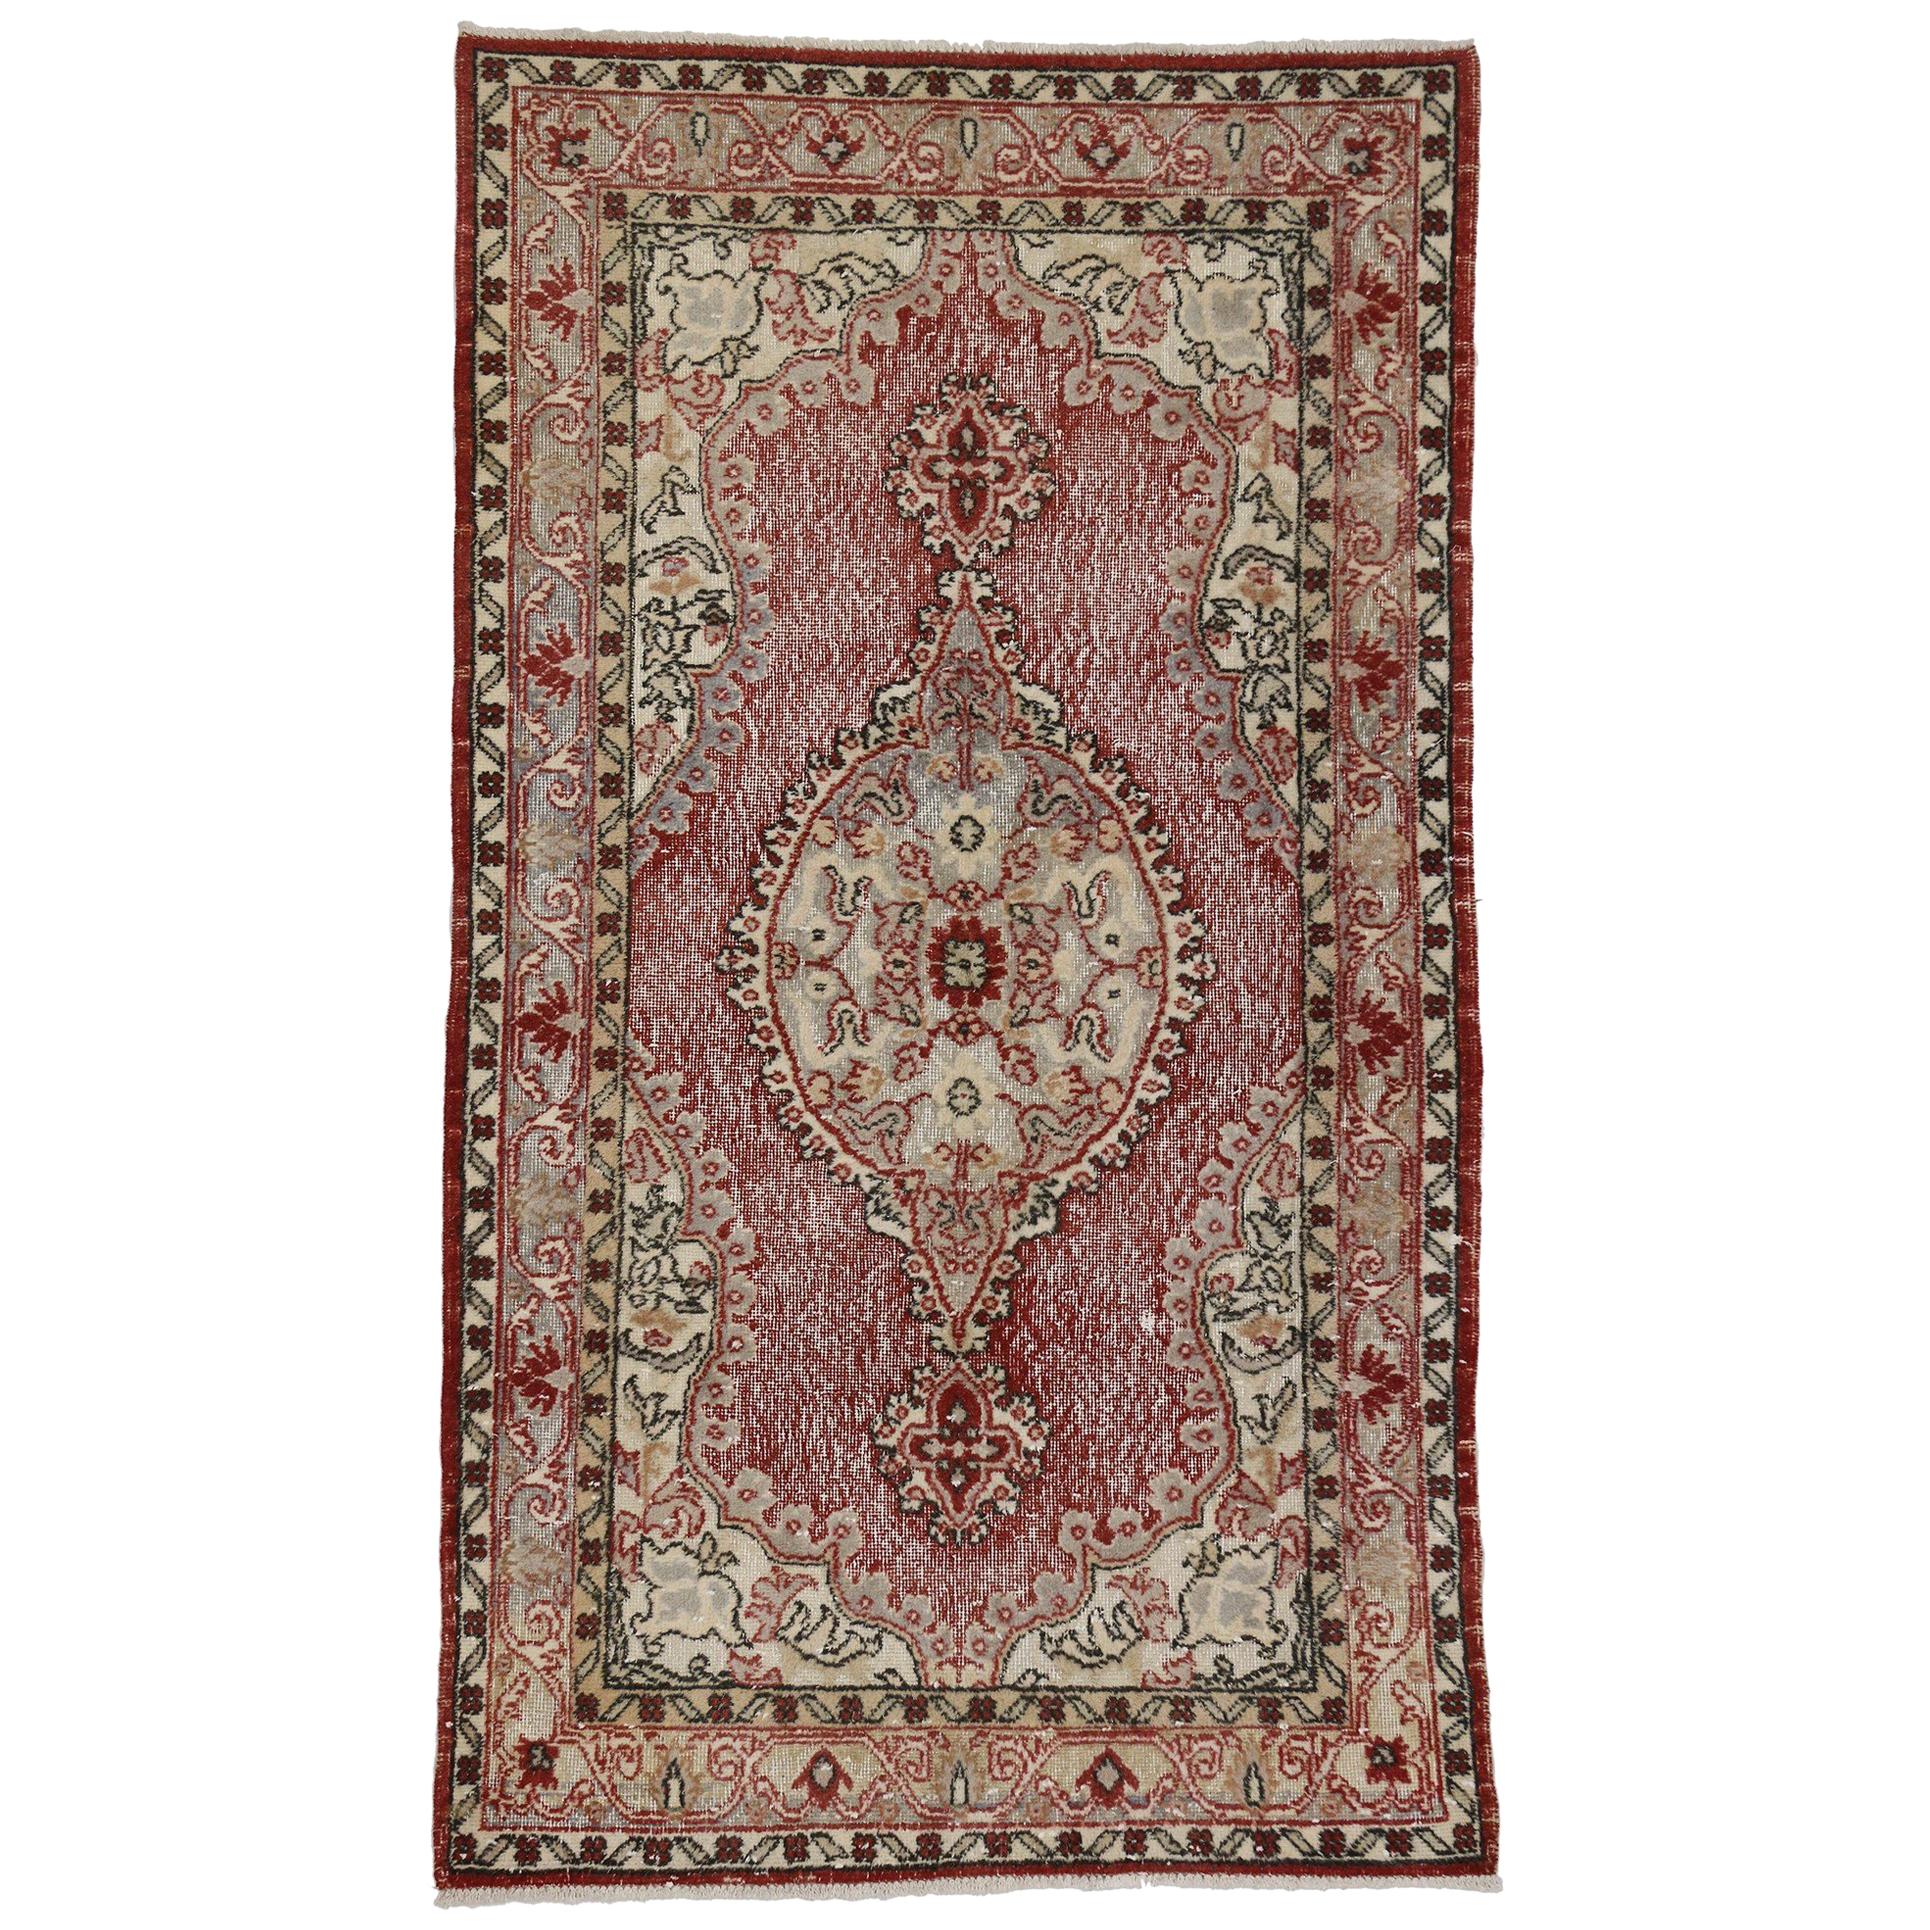 French Country Style Distressed Vintage Turkish Sivas Rug, Accent Rug